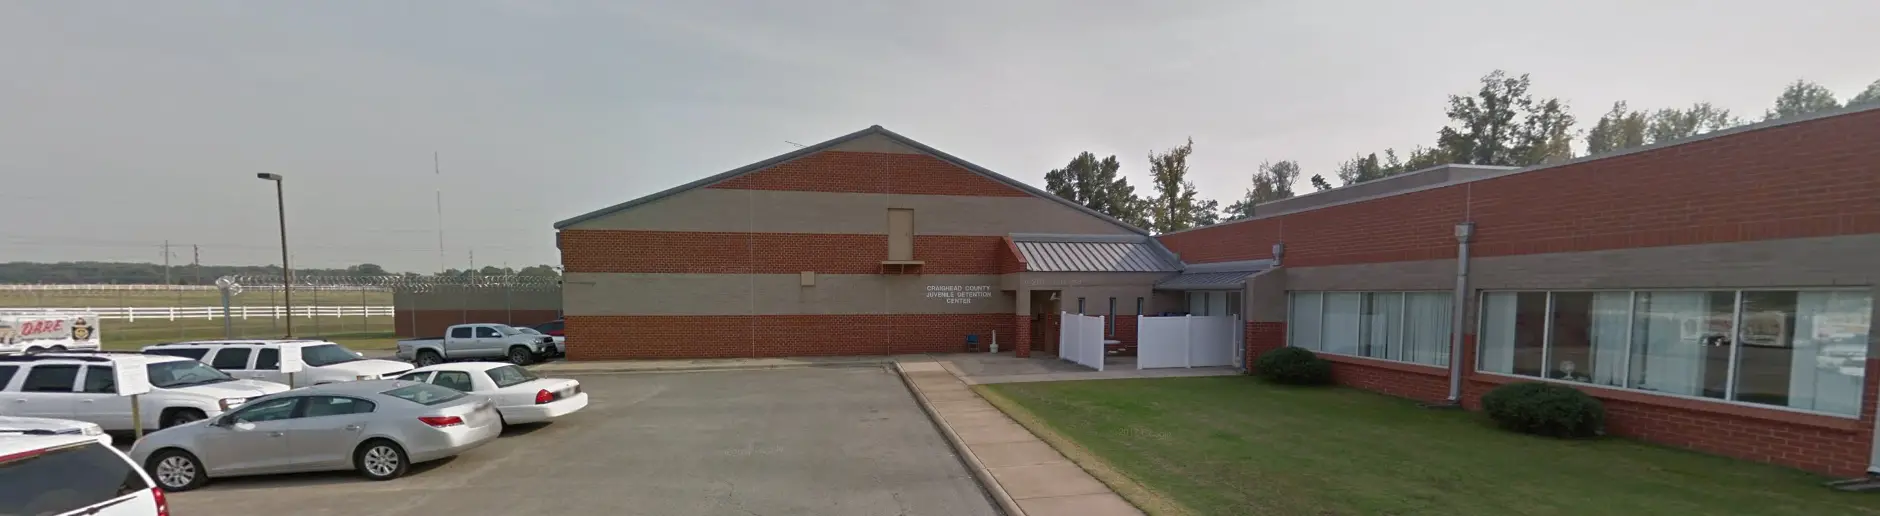 Craighead County Detention Center